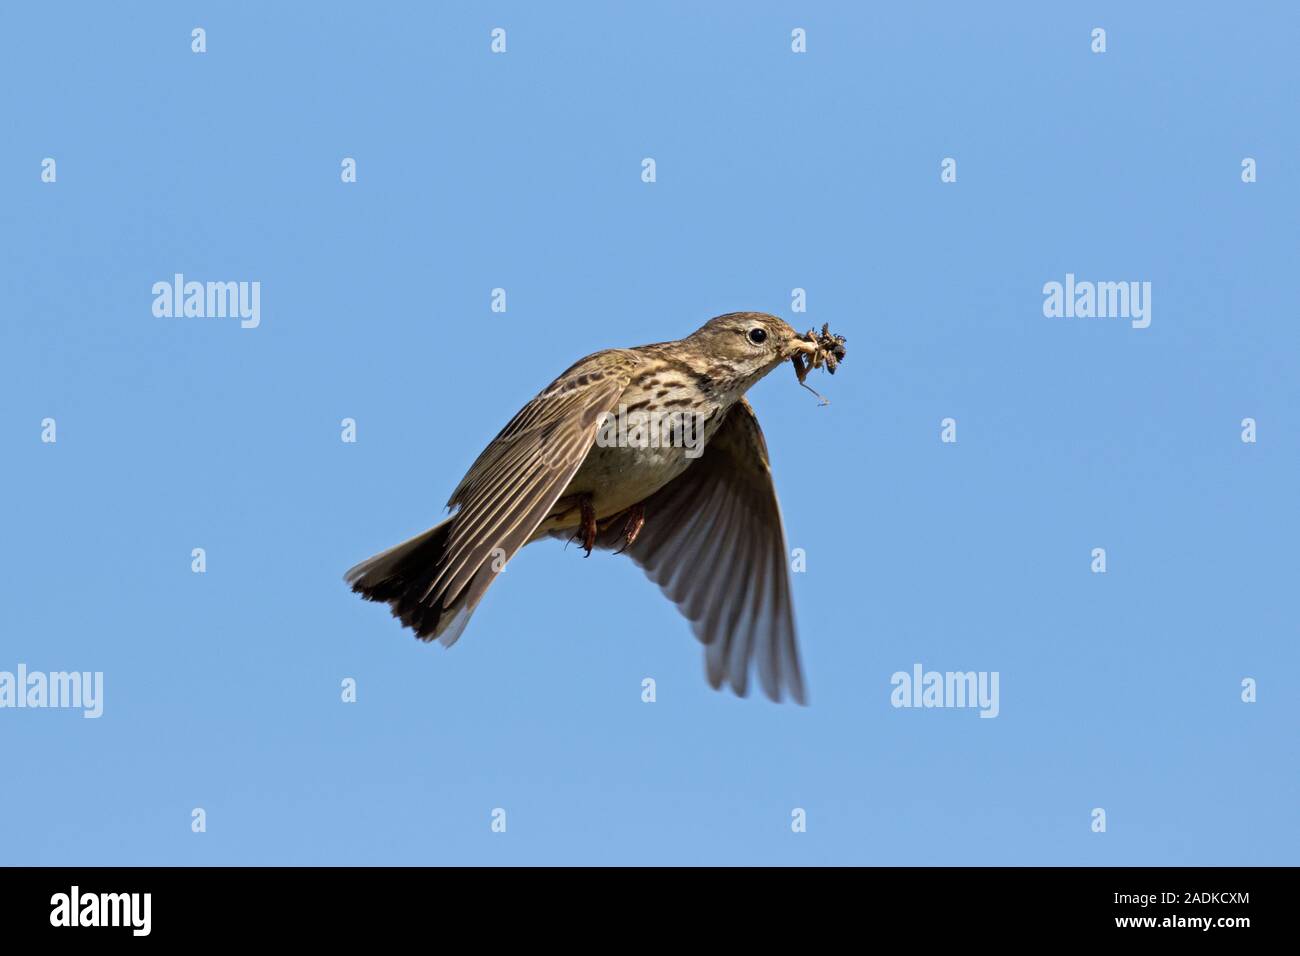 Meadow pipit (Anthus pratensis) with insect prey in beak flying against blue sky Stock Photo